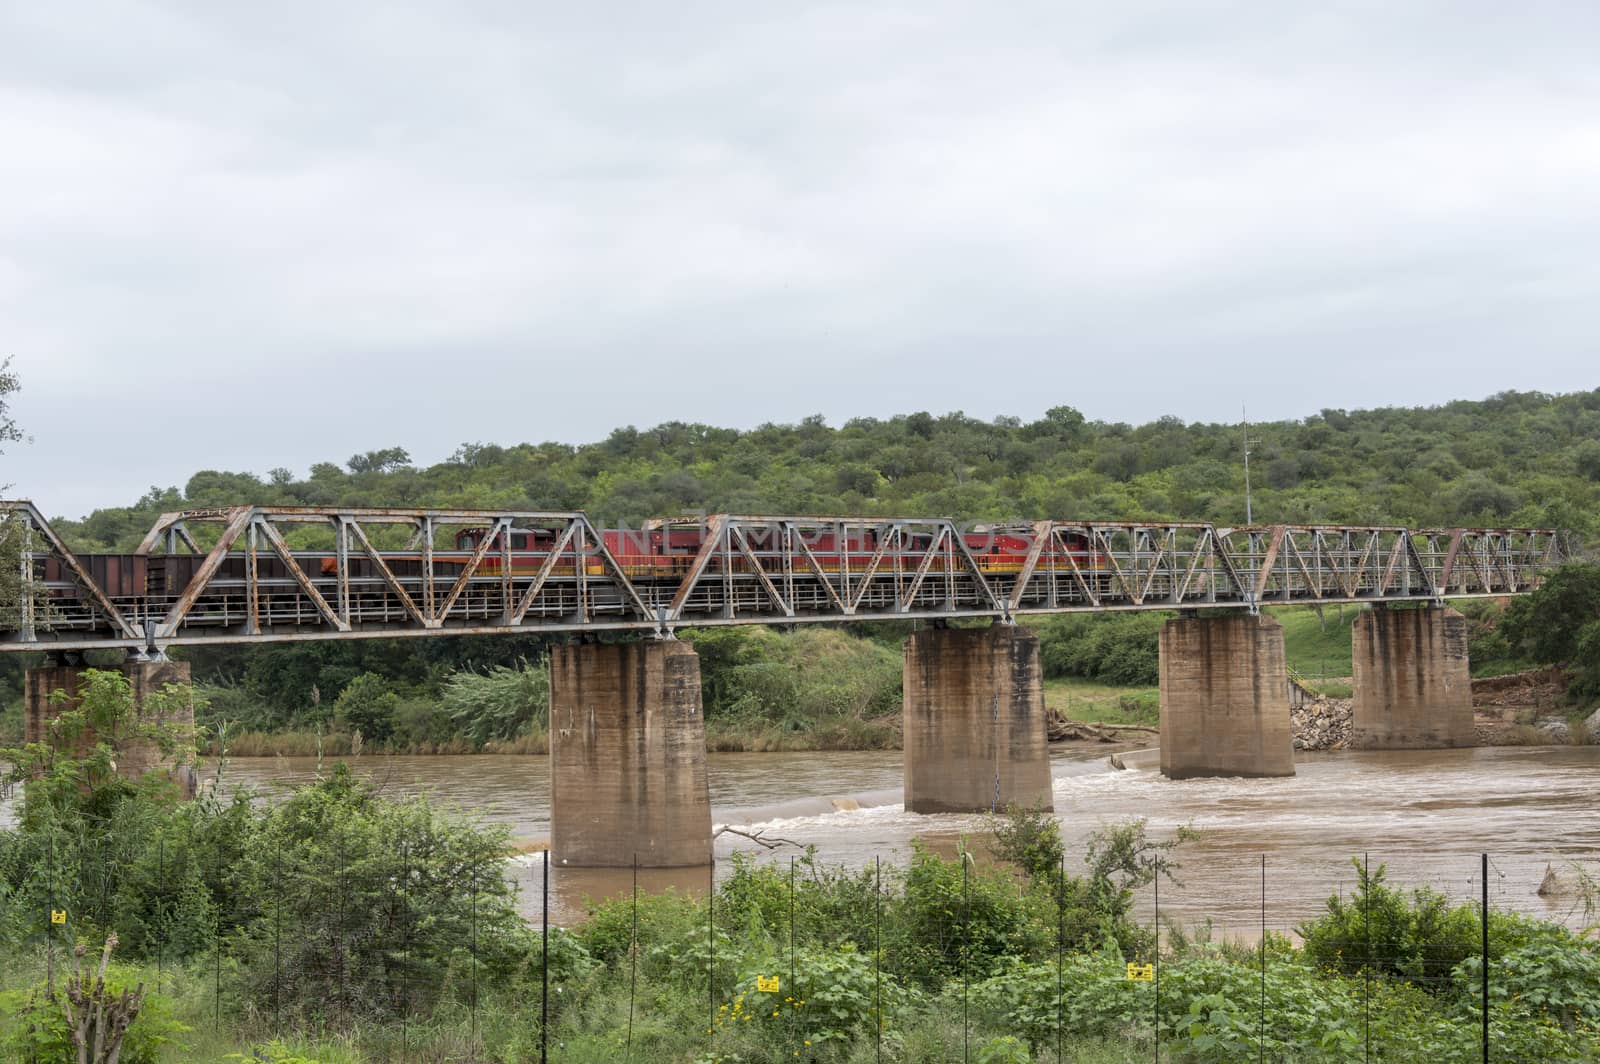 train crossing bridge over elephant river by compuinfoto